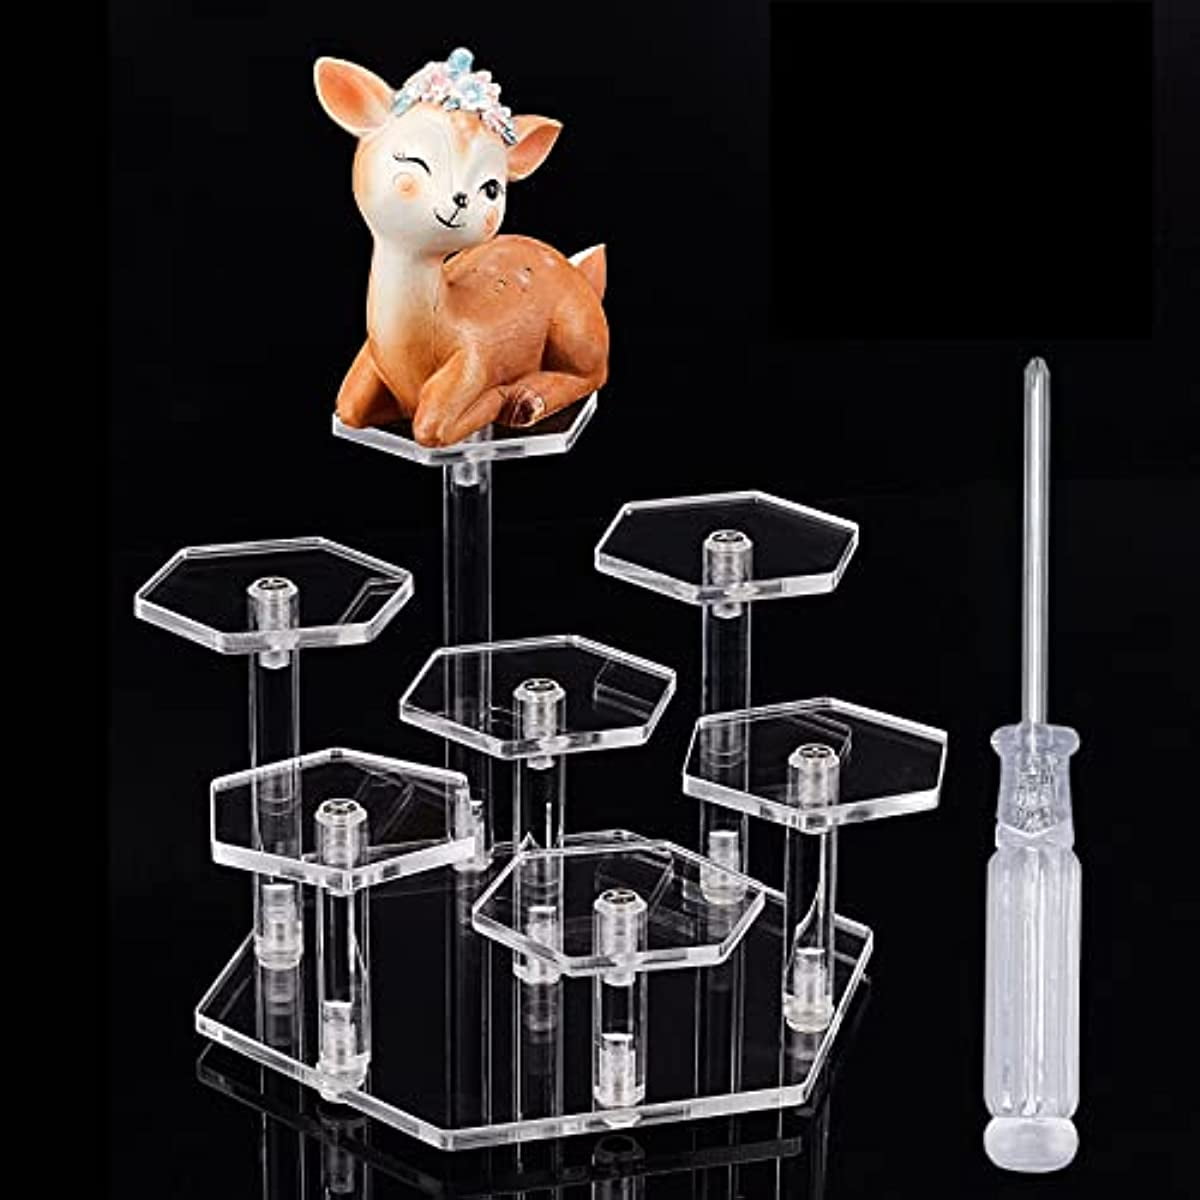 Acrylic Stands Risers For Display Jewelry,Lipstick,Candy